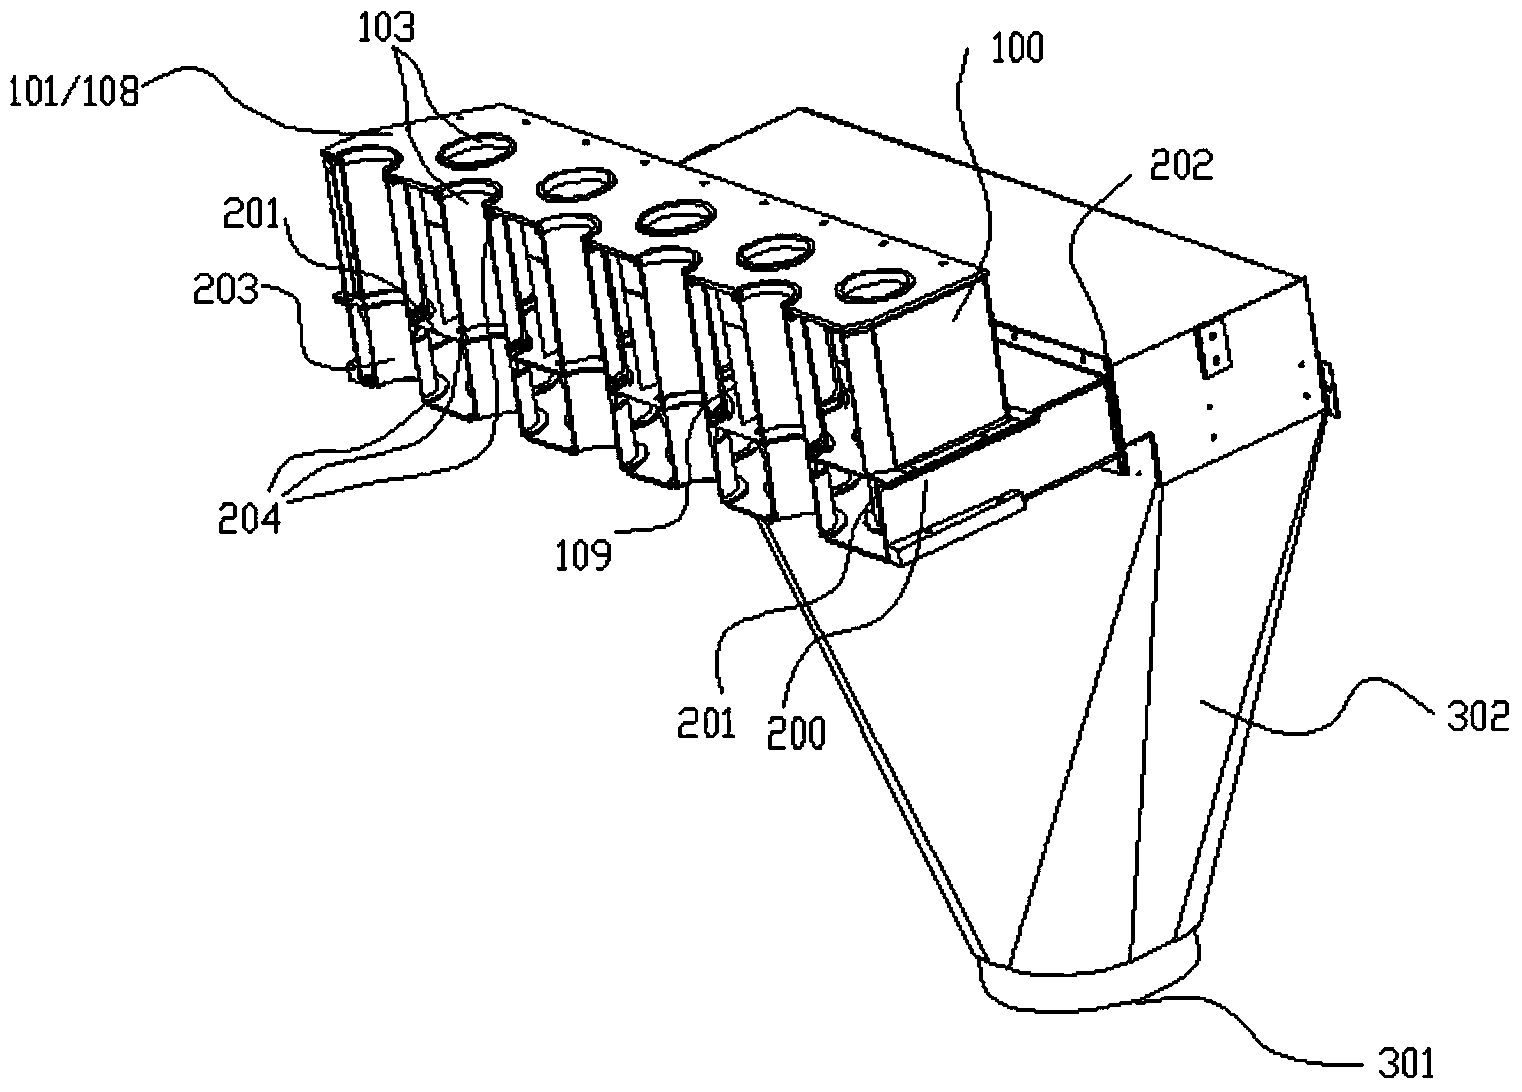 Multi-row synthetic tow cooling device